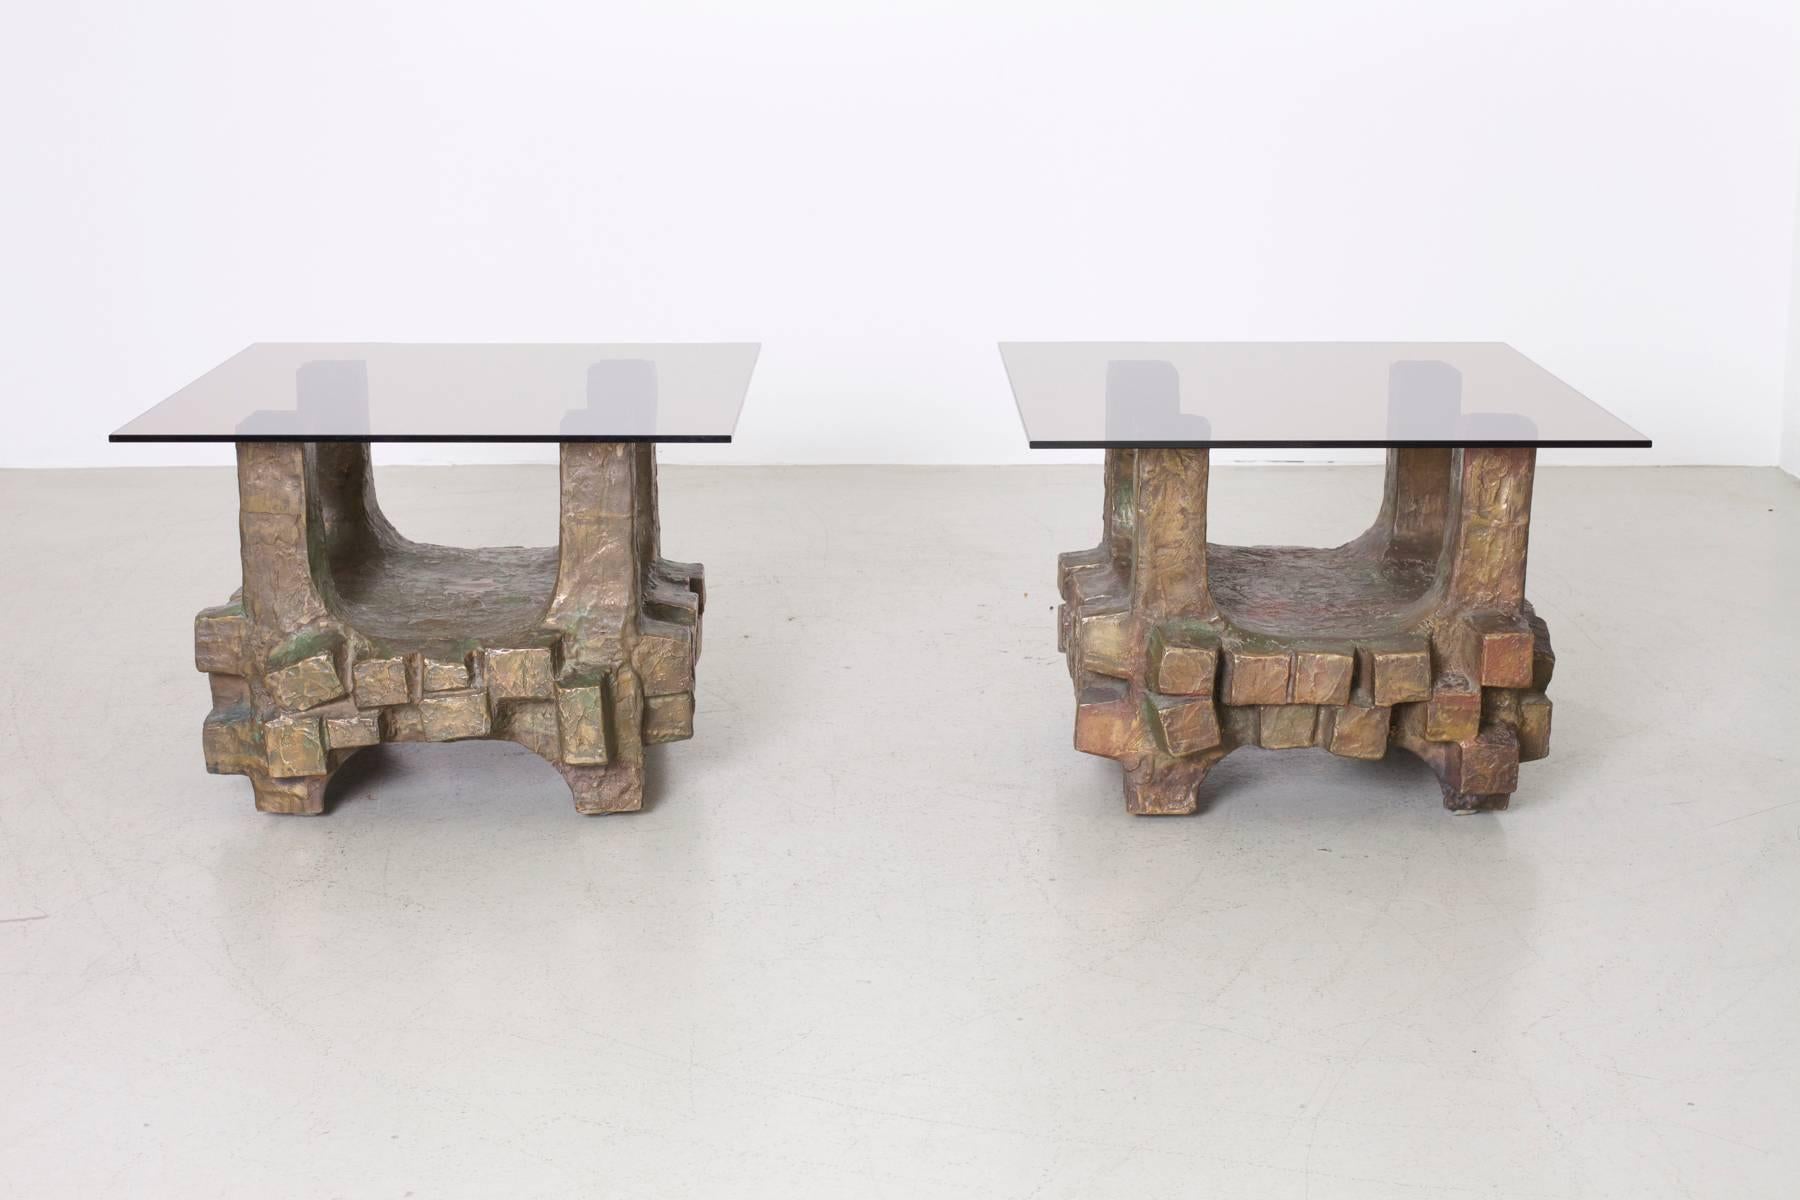 Wonderful and very impressive pair of massive bronze side tables. The tables are made by an German artist in the 1960s and they’re unique. Measurements are for one base only.

